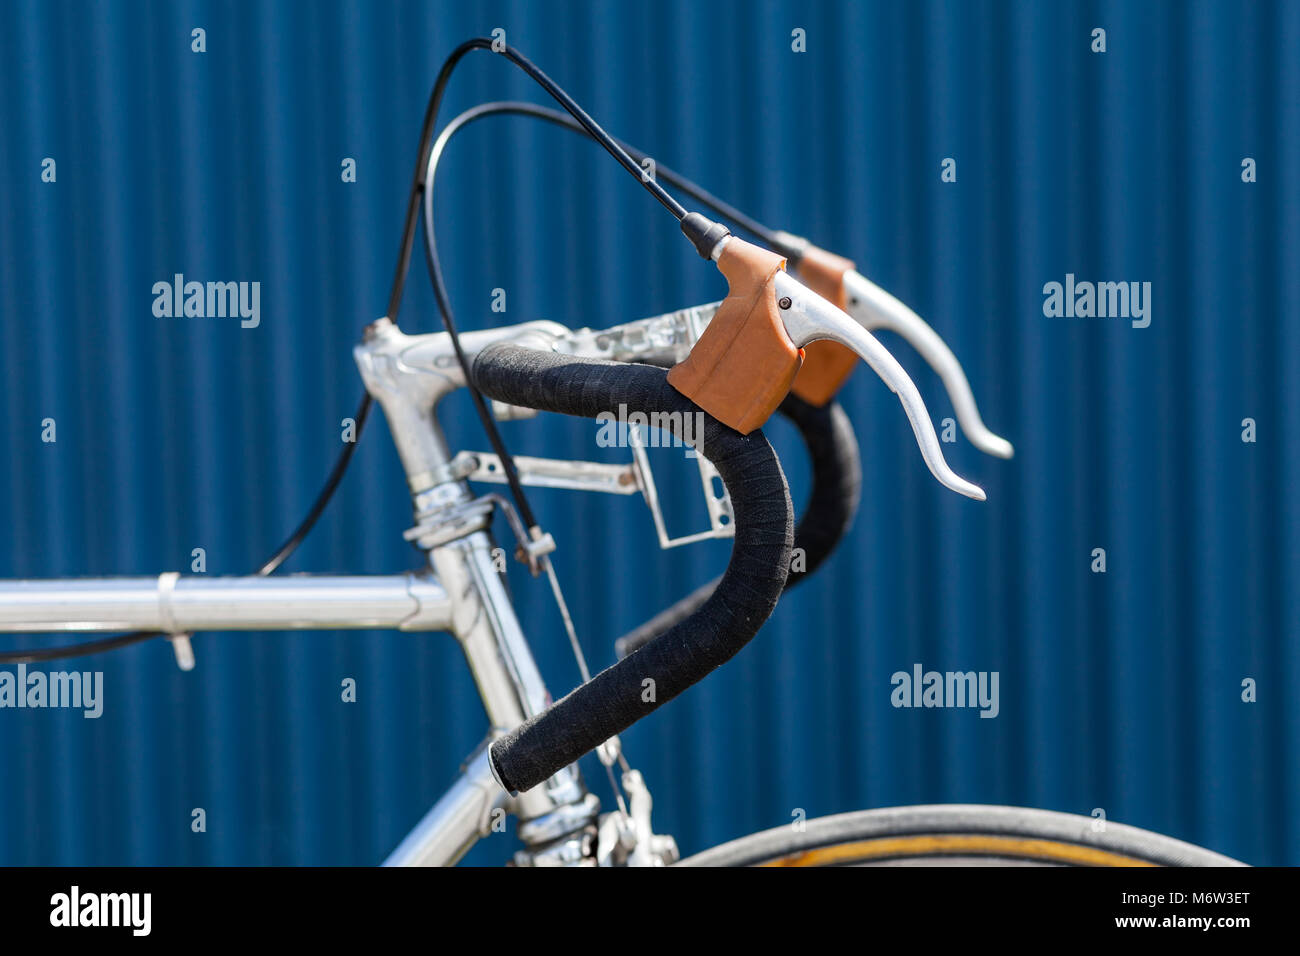 Handlbars with black tape and brake levers of old racing bicycle with chrome frame in front of blue wall Stock Photo